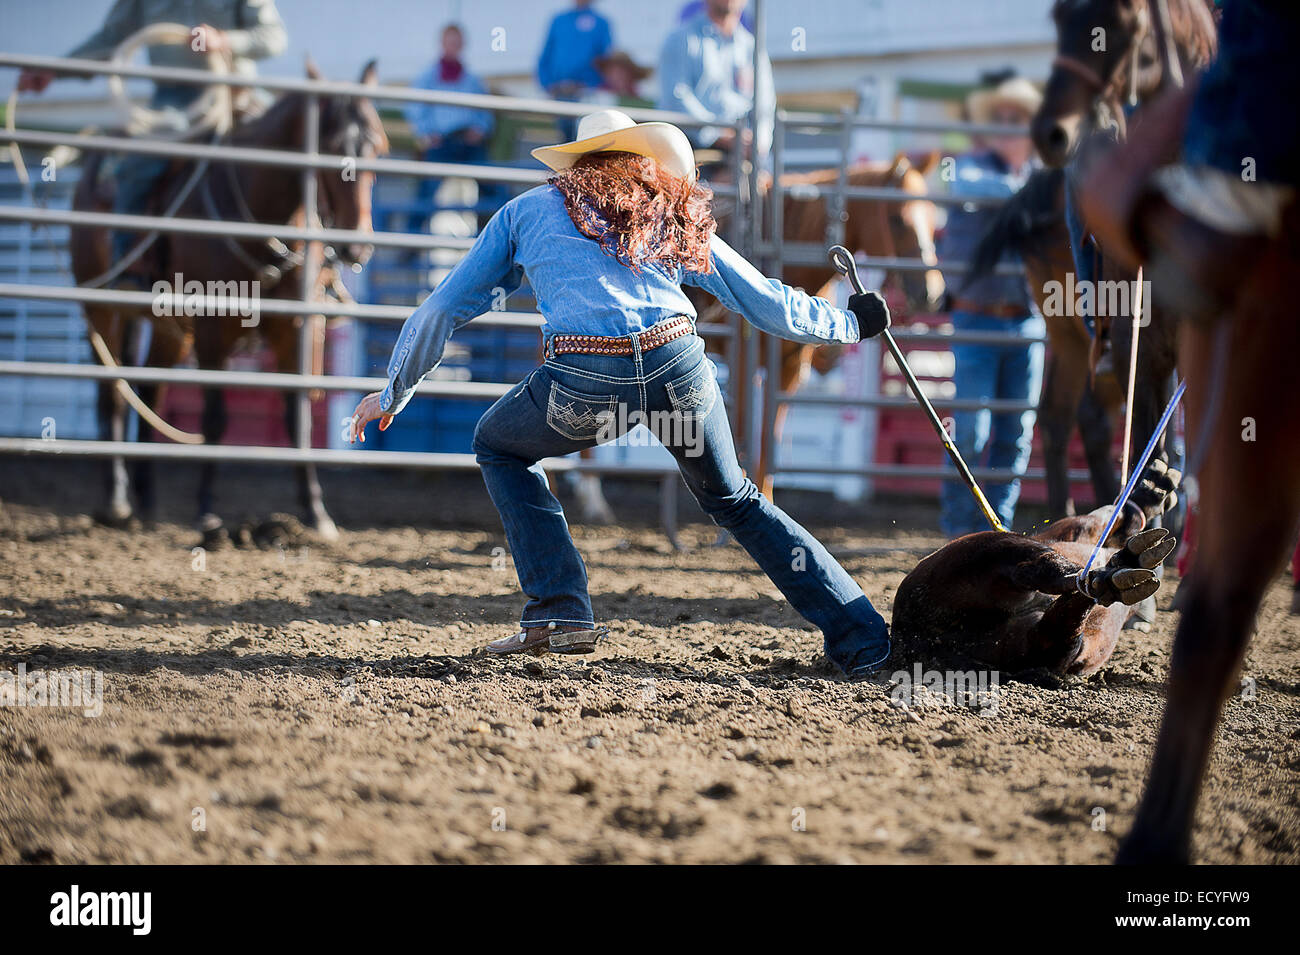 Caucasian cowgirl tying horse in rodeo on ranch Stock Photo